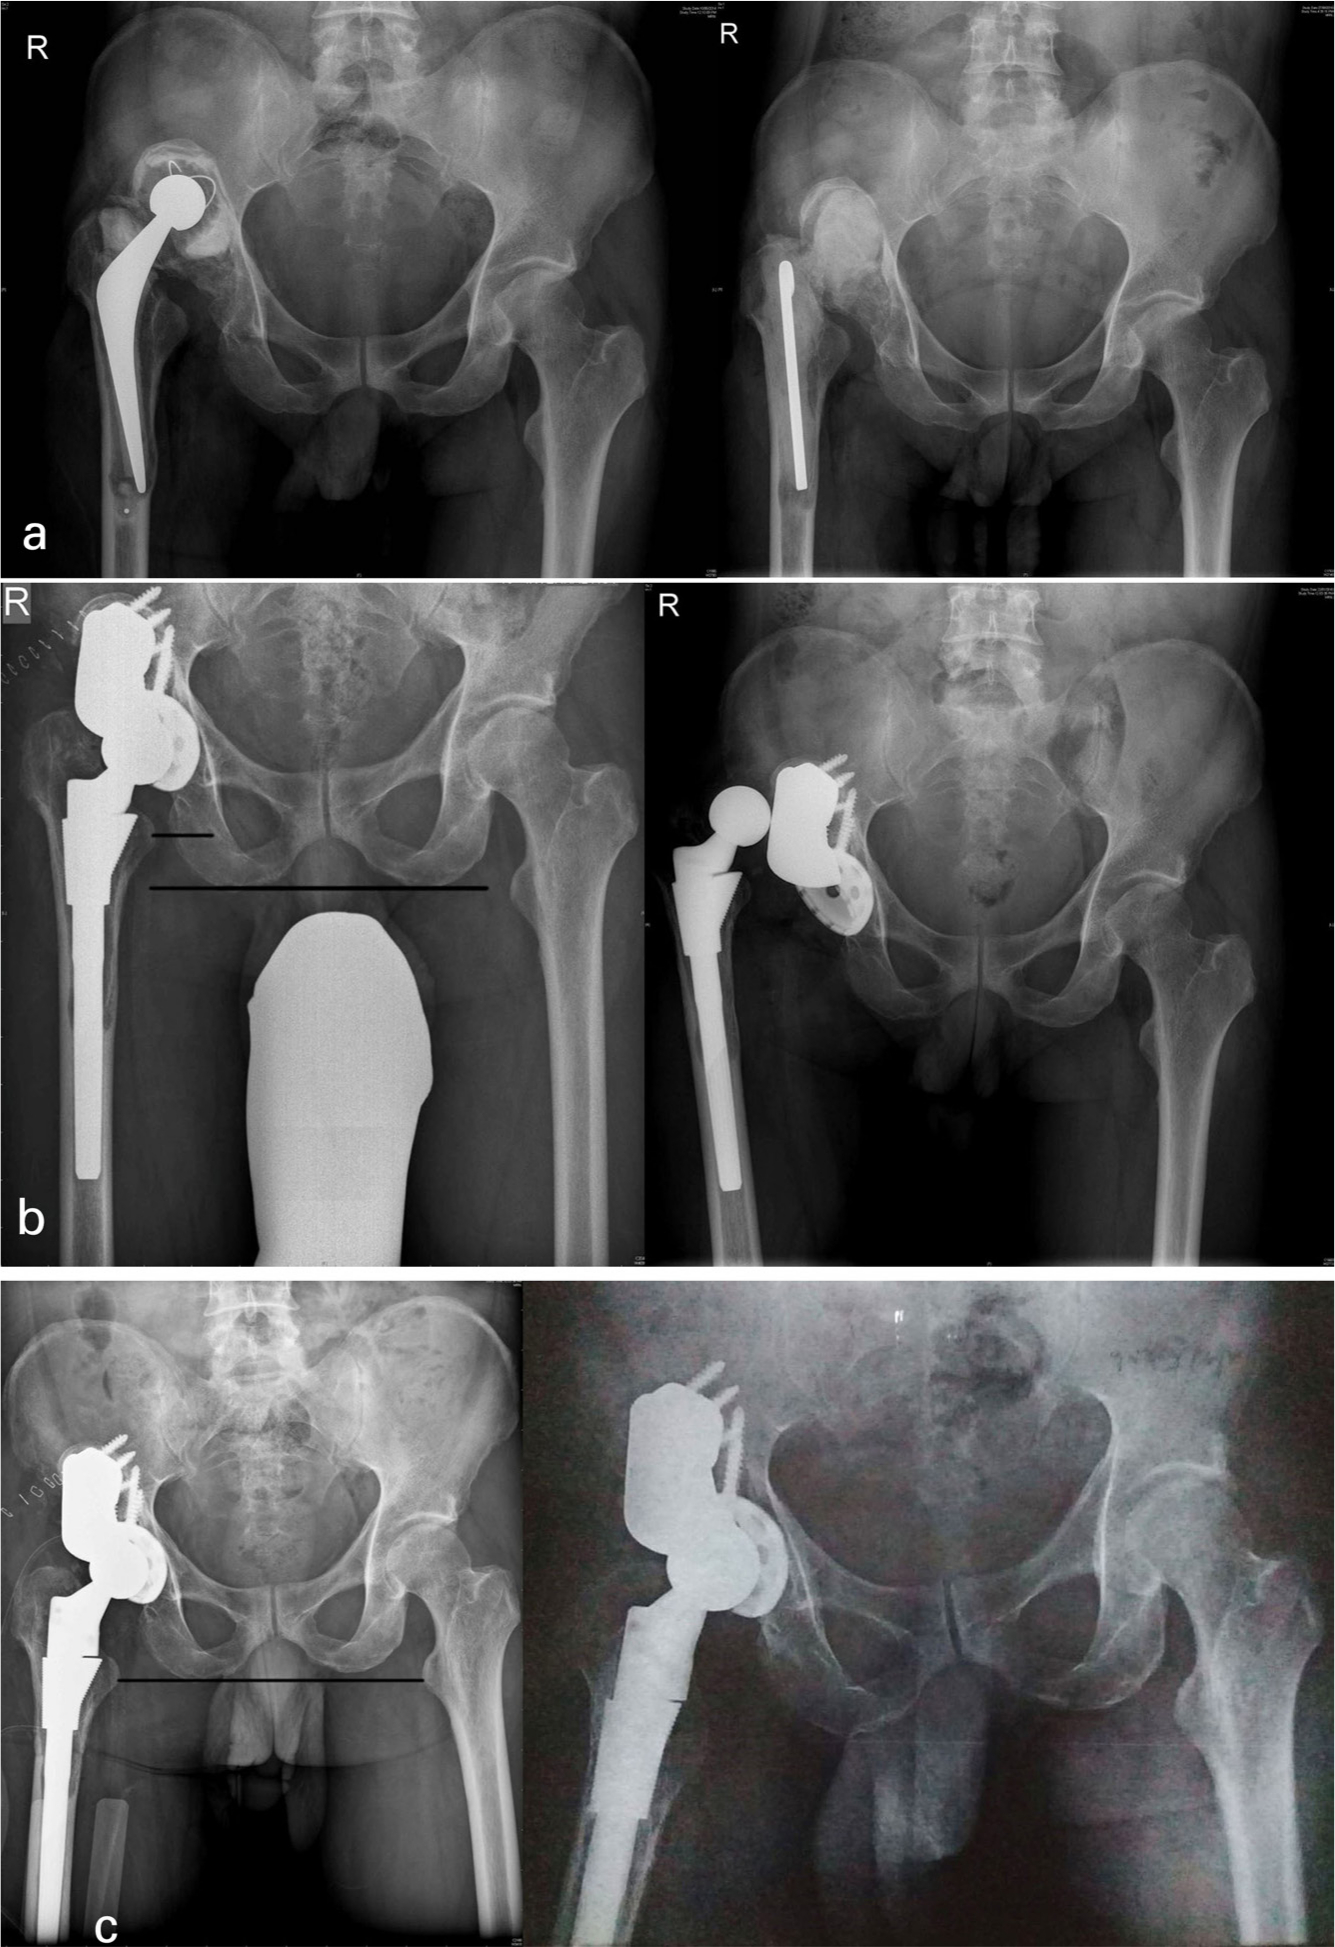 Fig. 2 
          (a) 41-year-old male with septic loosening , one year and four months postoperatively stage 1 revision THA with proximal migration and type 3a acetabular deficiency. (b) Postoperative acetabular reconstruction for type 3a defect with posterosuperior buttress augment and acetabulumcomponent with SROM femur, reduction stable at final reduction with extensive soft tissue release, dislocation three months postoperatively due to reduced offset causing impingement (c) Postoperative femoral shortening with femoral component changed to calcar replacement CR SROM (DePuy, USA) with restoration of offset (horizontal offset correction 10.5 mm to 32.7 mm (vertical offset 23.7 mm to 58.6 mm); four-year postoperatively showing componentnand augment well fixed with femoral component and osteotomy union.
        